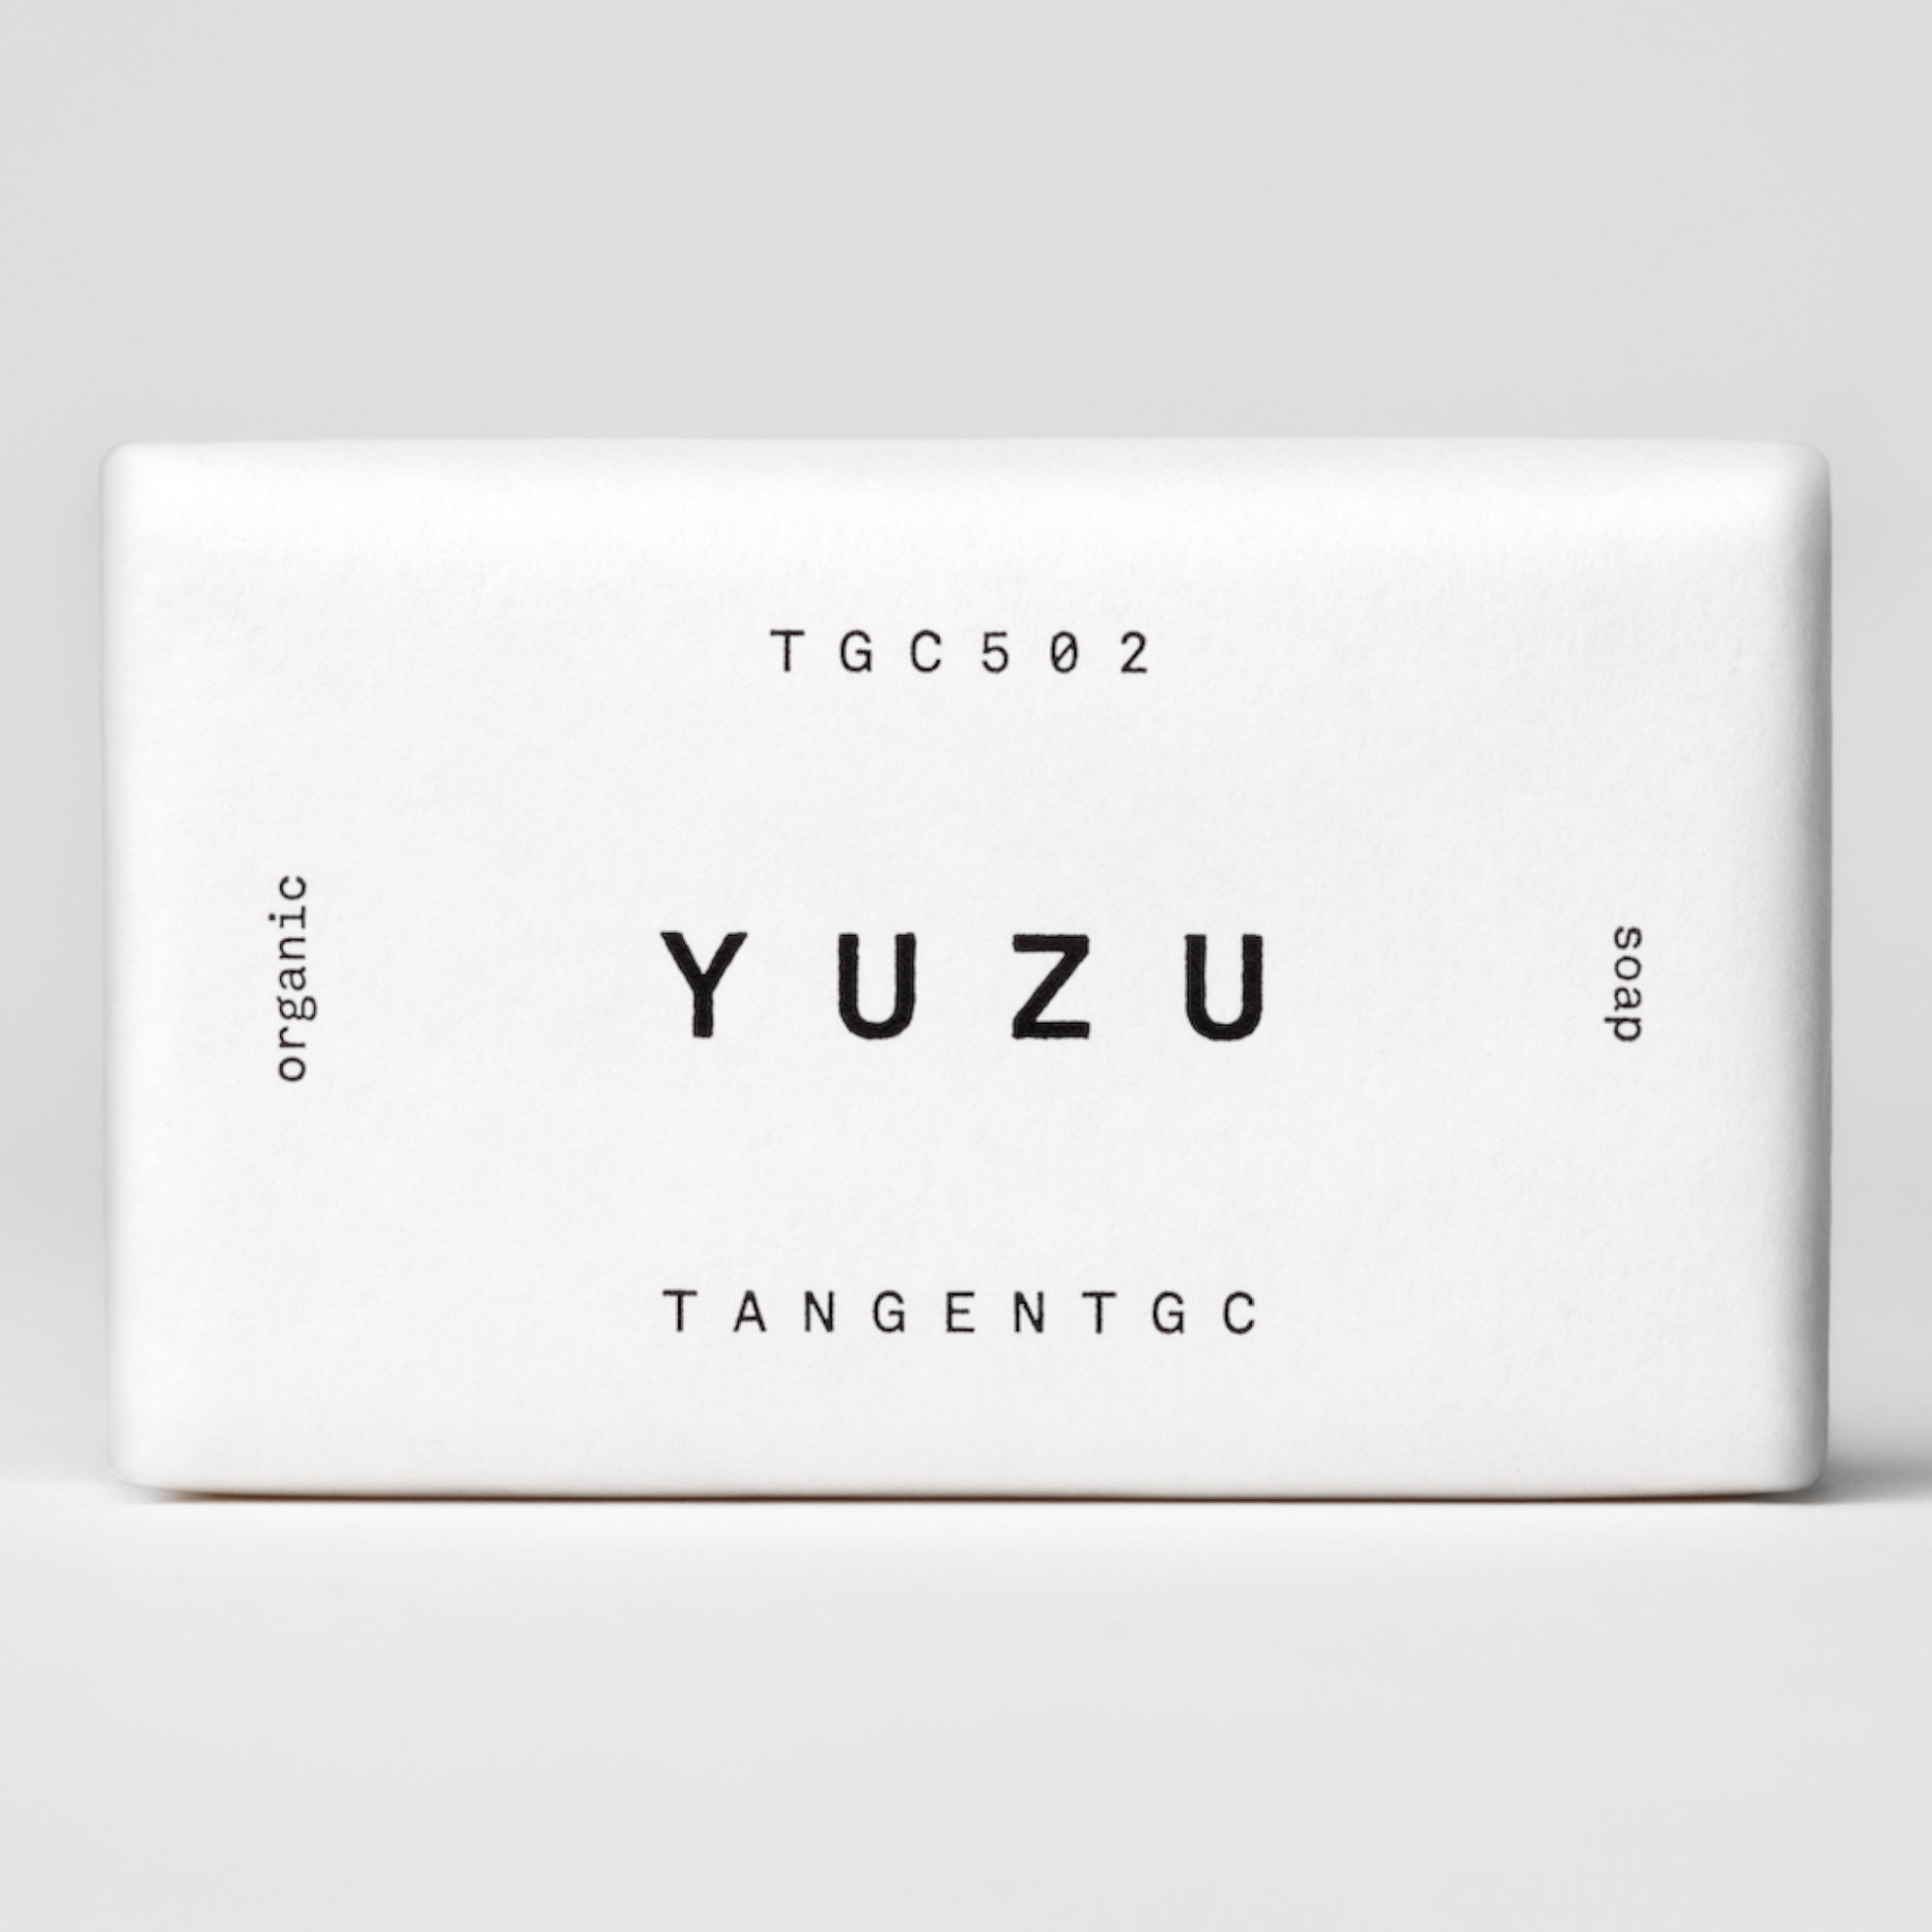 TGC502 YUZU SOAP BAR TGC502 Yuzu soap bar by Tangent GC, TGC502 is an organic soap bar – with fruity, acid and citric yuzu perfume. The soap is made of pure natural fats and vegetable glycerine that will keep your hands soft. This is green. Ever since Tangent GC set out in 2012 sustainability has been central to them. Tangent GC products are natural and organic, and they have been from the outset. The natural aspect was important, not only in order to avoid harmful chemicals, but as a mean to raise the over